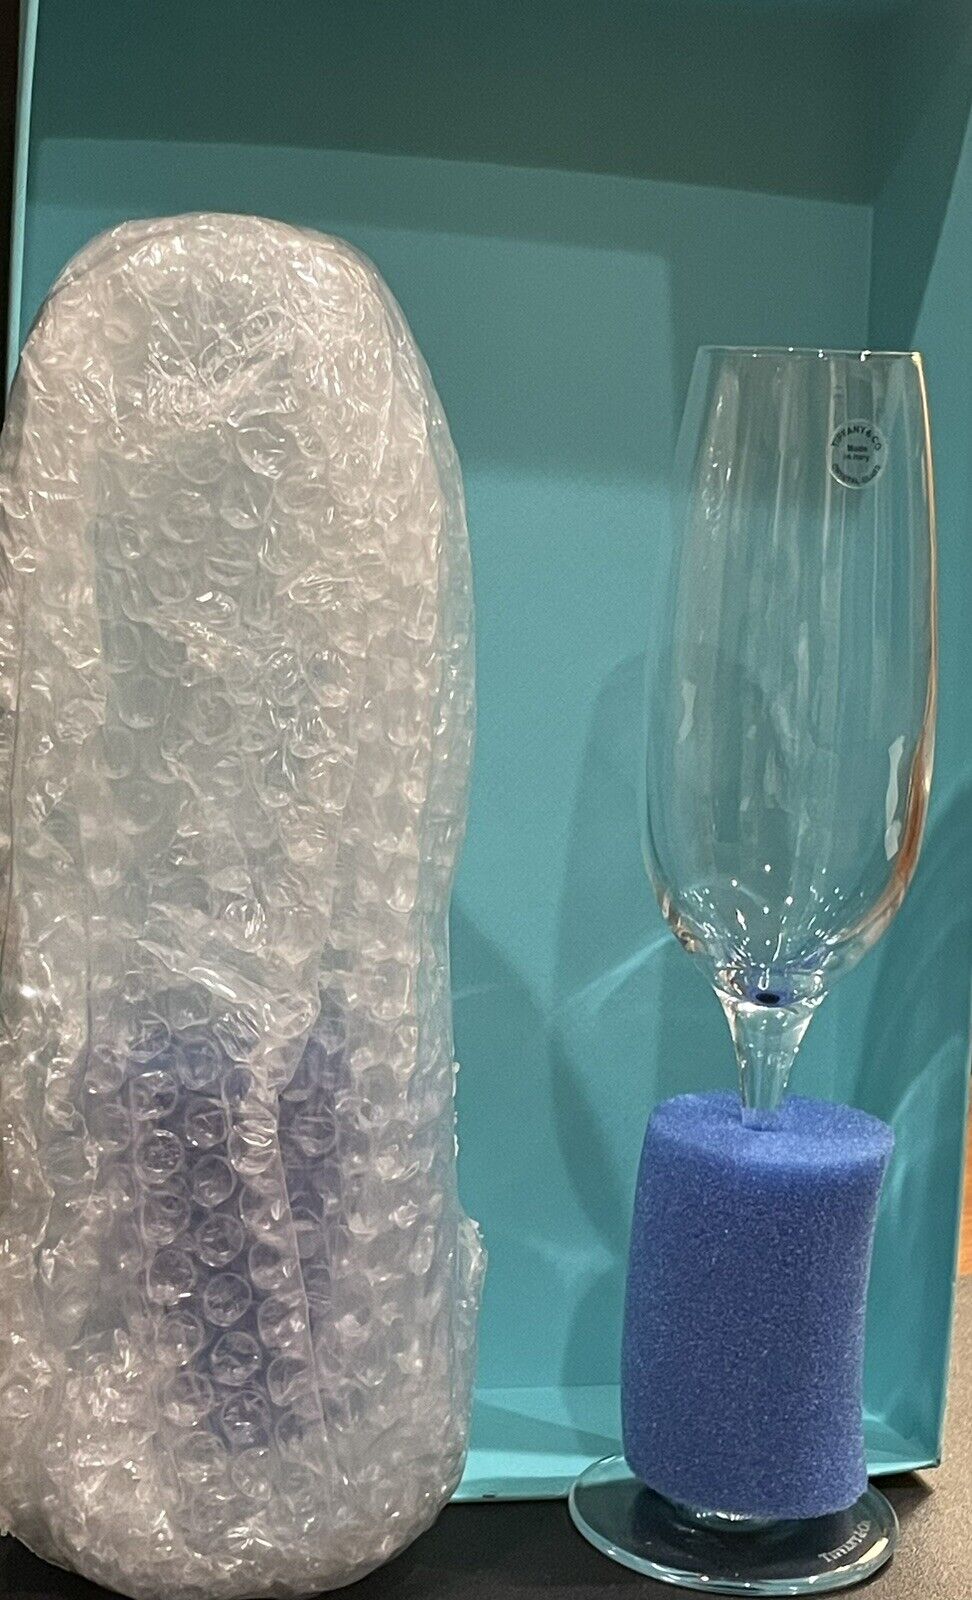 New Tiffany & Co. Crystal glass champagne flutes set of 2 with box Made In Italy